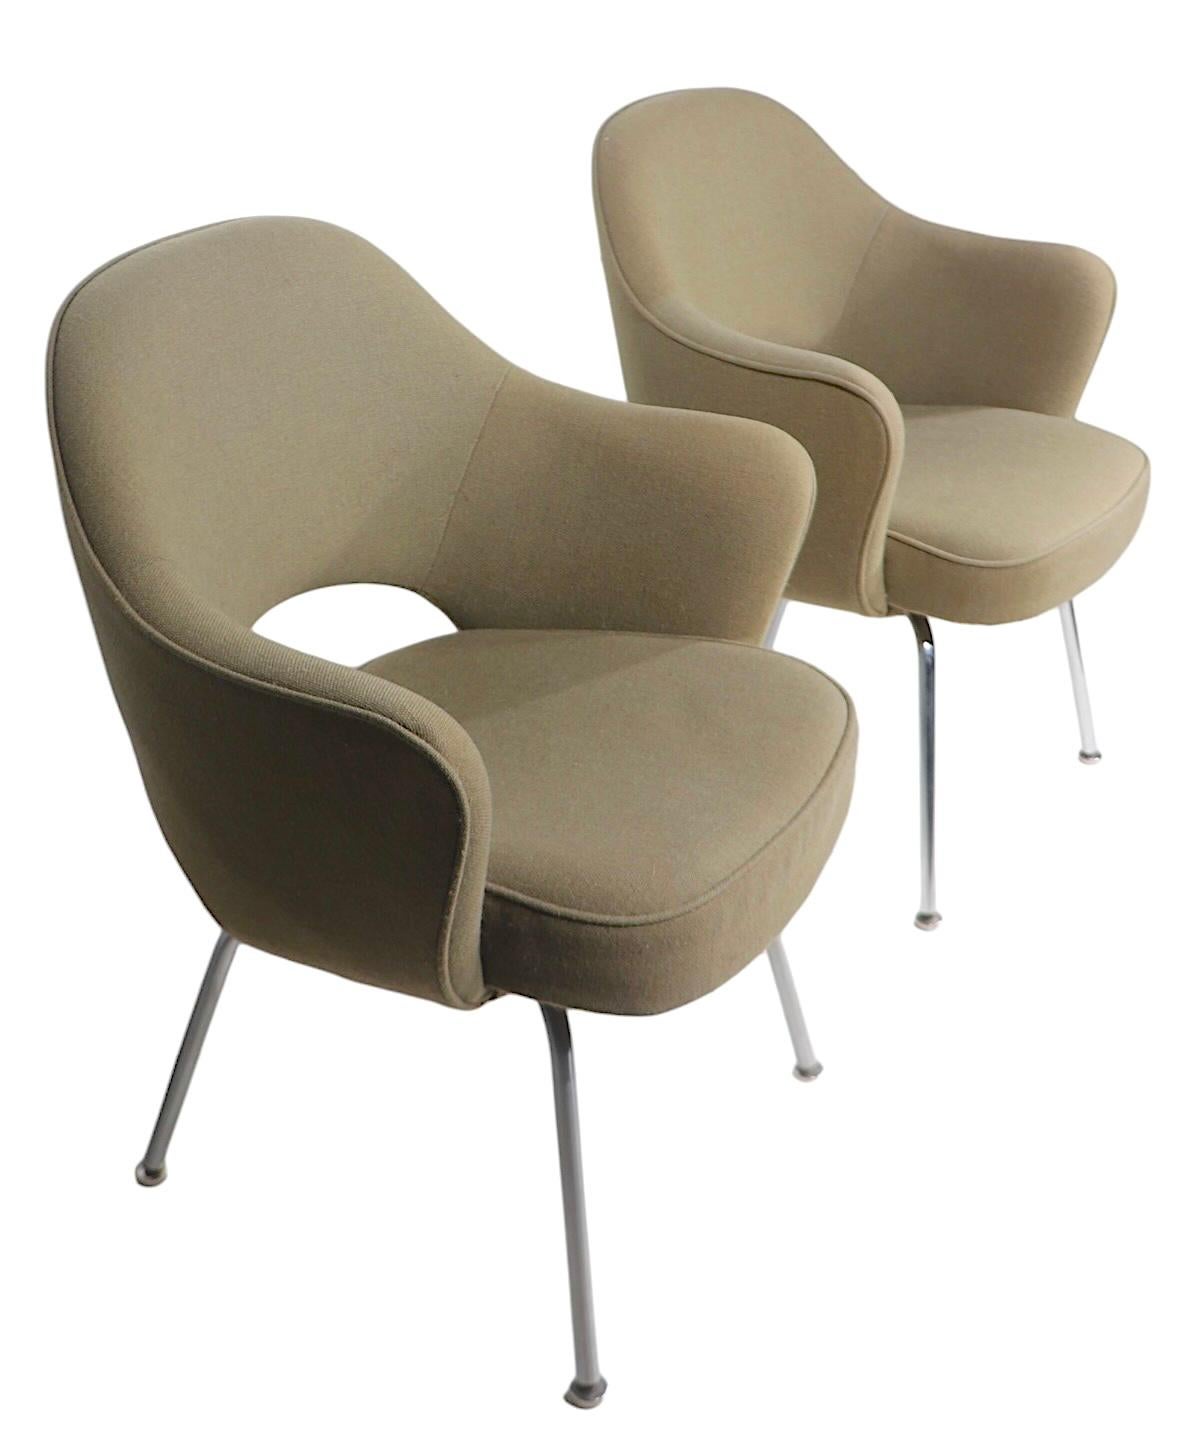 Pr. Vintage Saarinen for Knoll Executive Chairs c. 1960/70's For Sale 7